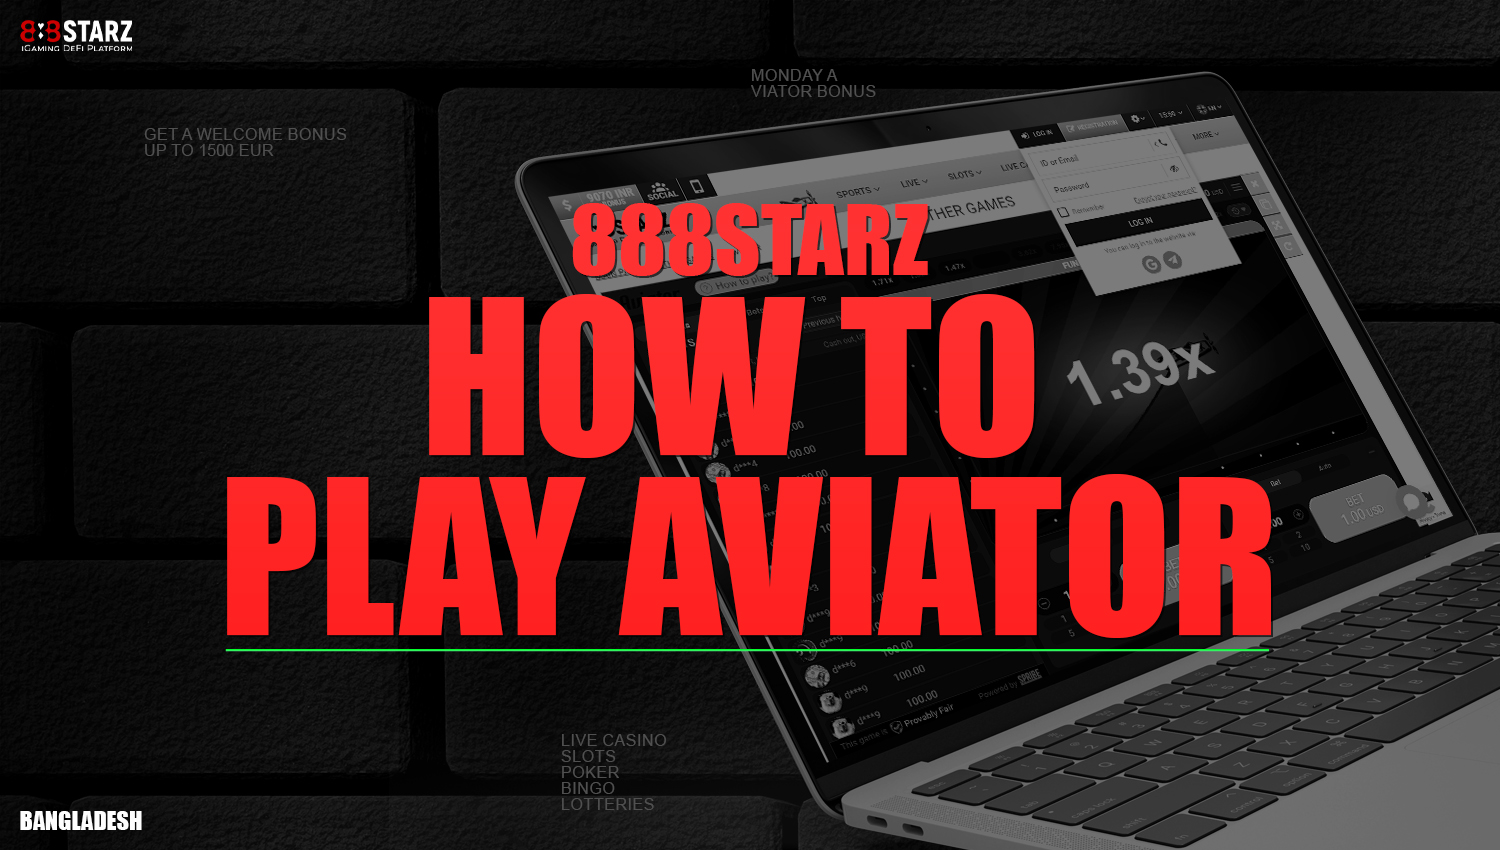 Instructions for Aviator game for users from Bangladesh